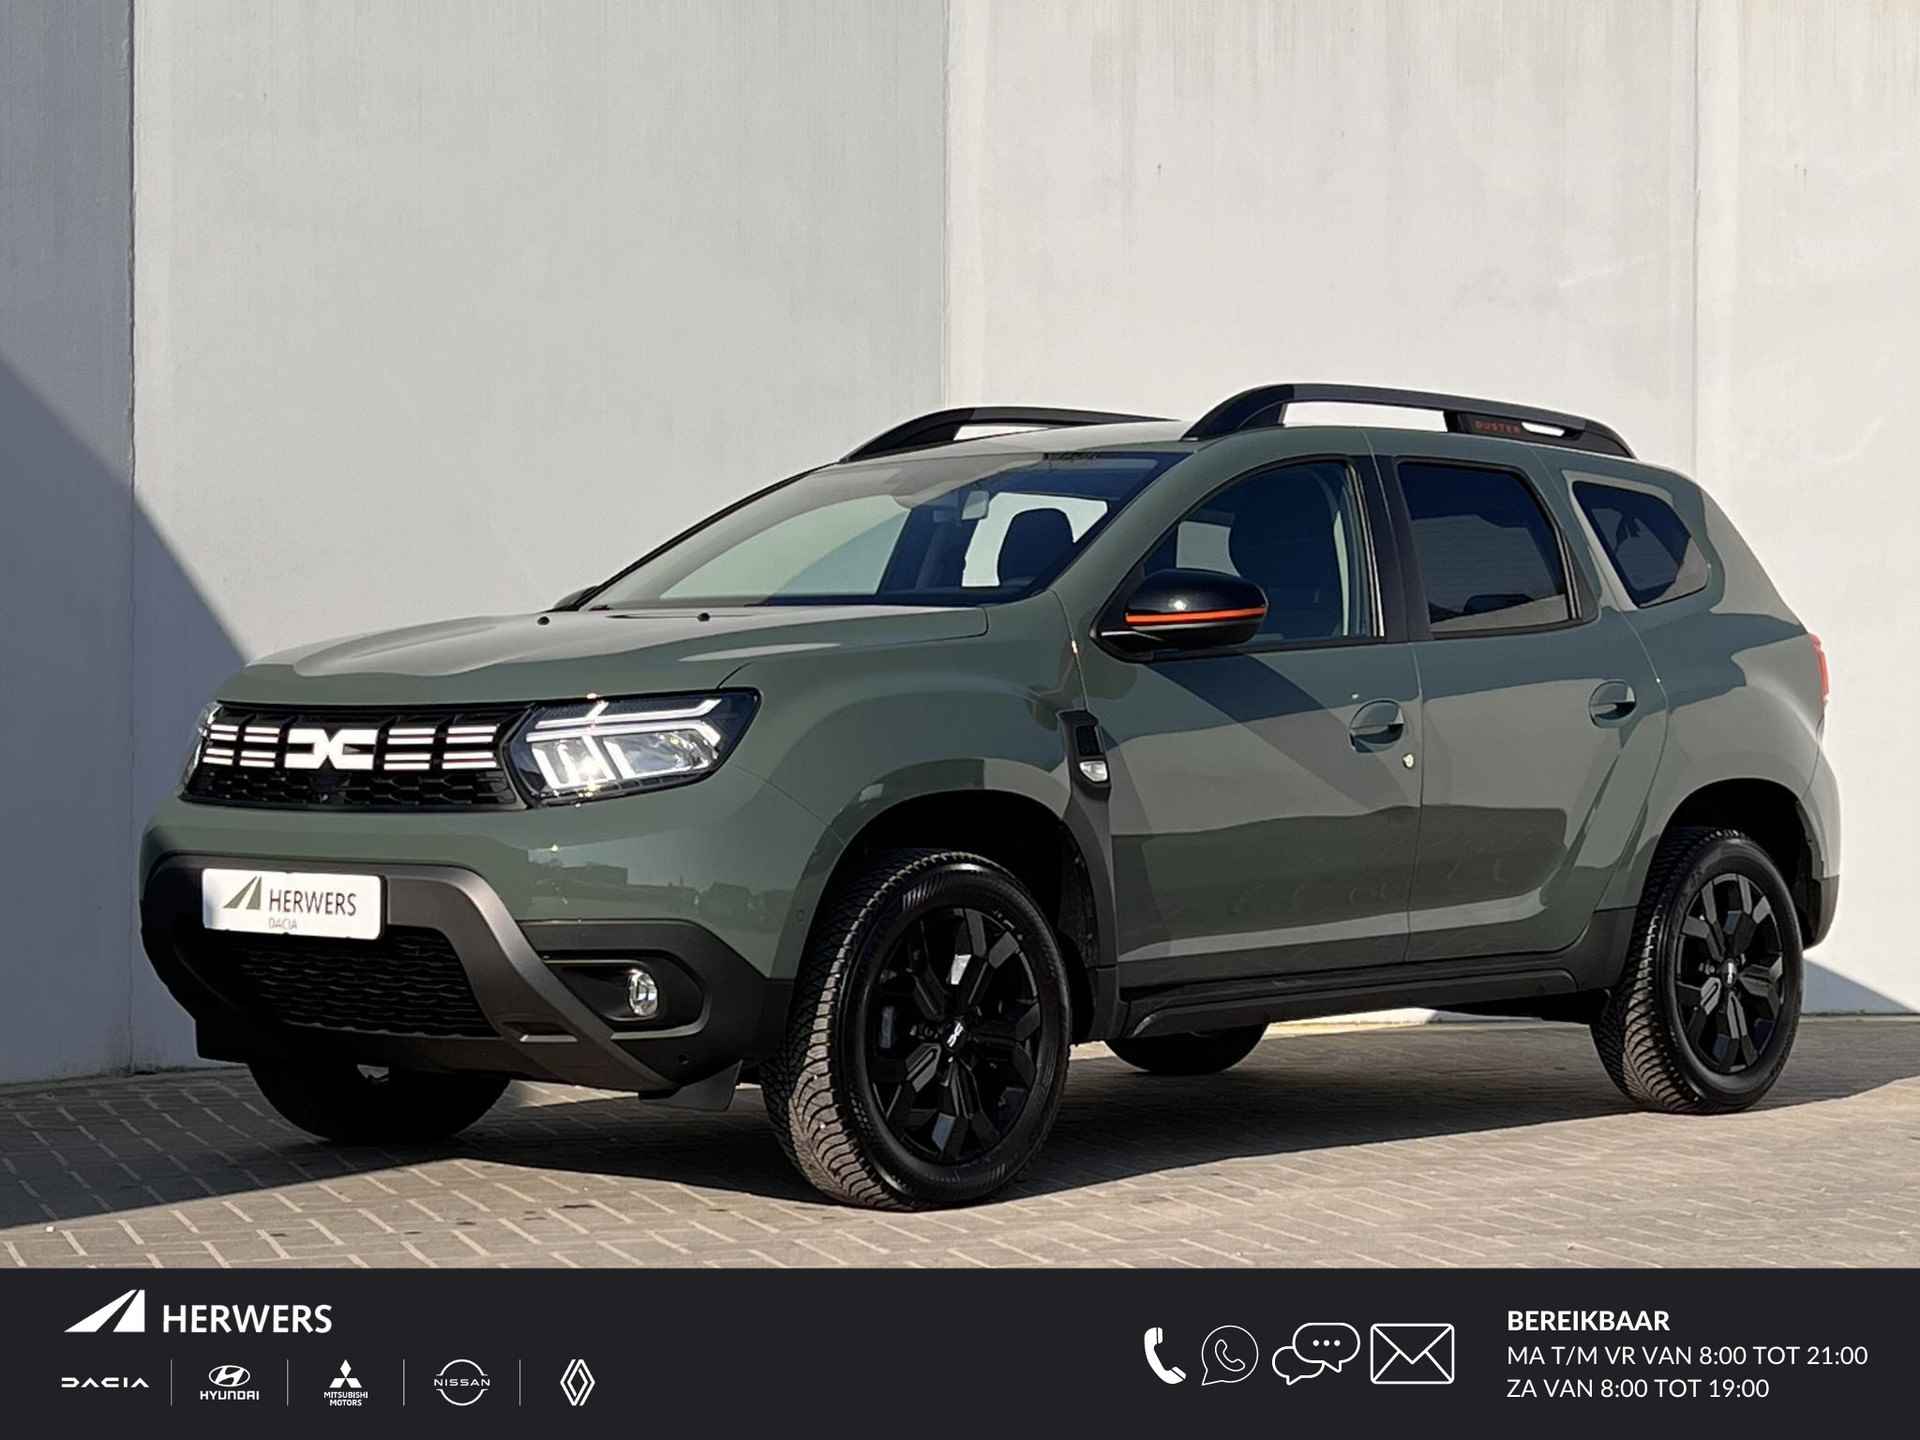 Dacia Duster 1.3 TCe 150 Extreme Automaat / Navigatie / Camera 360° / Apple Carplay Android / All Season banden / - 1/49